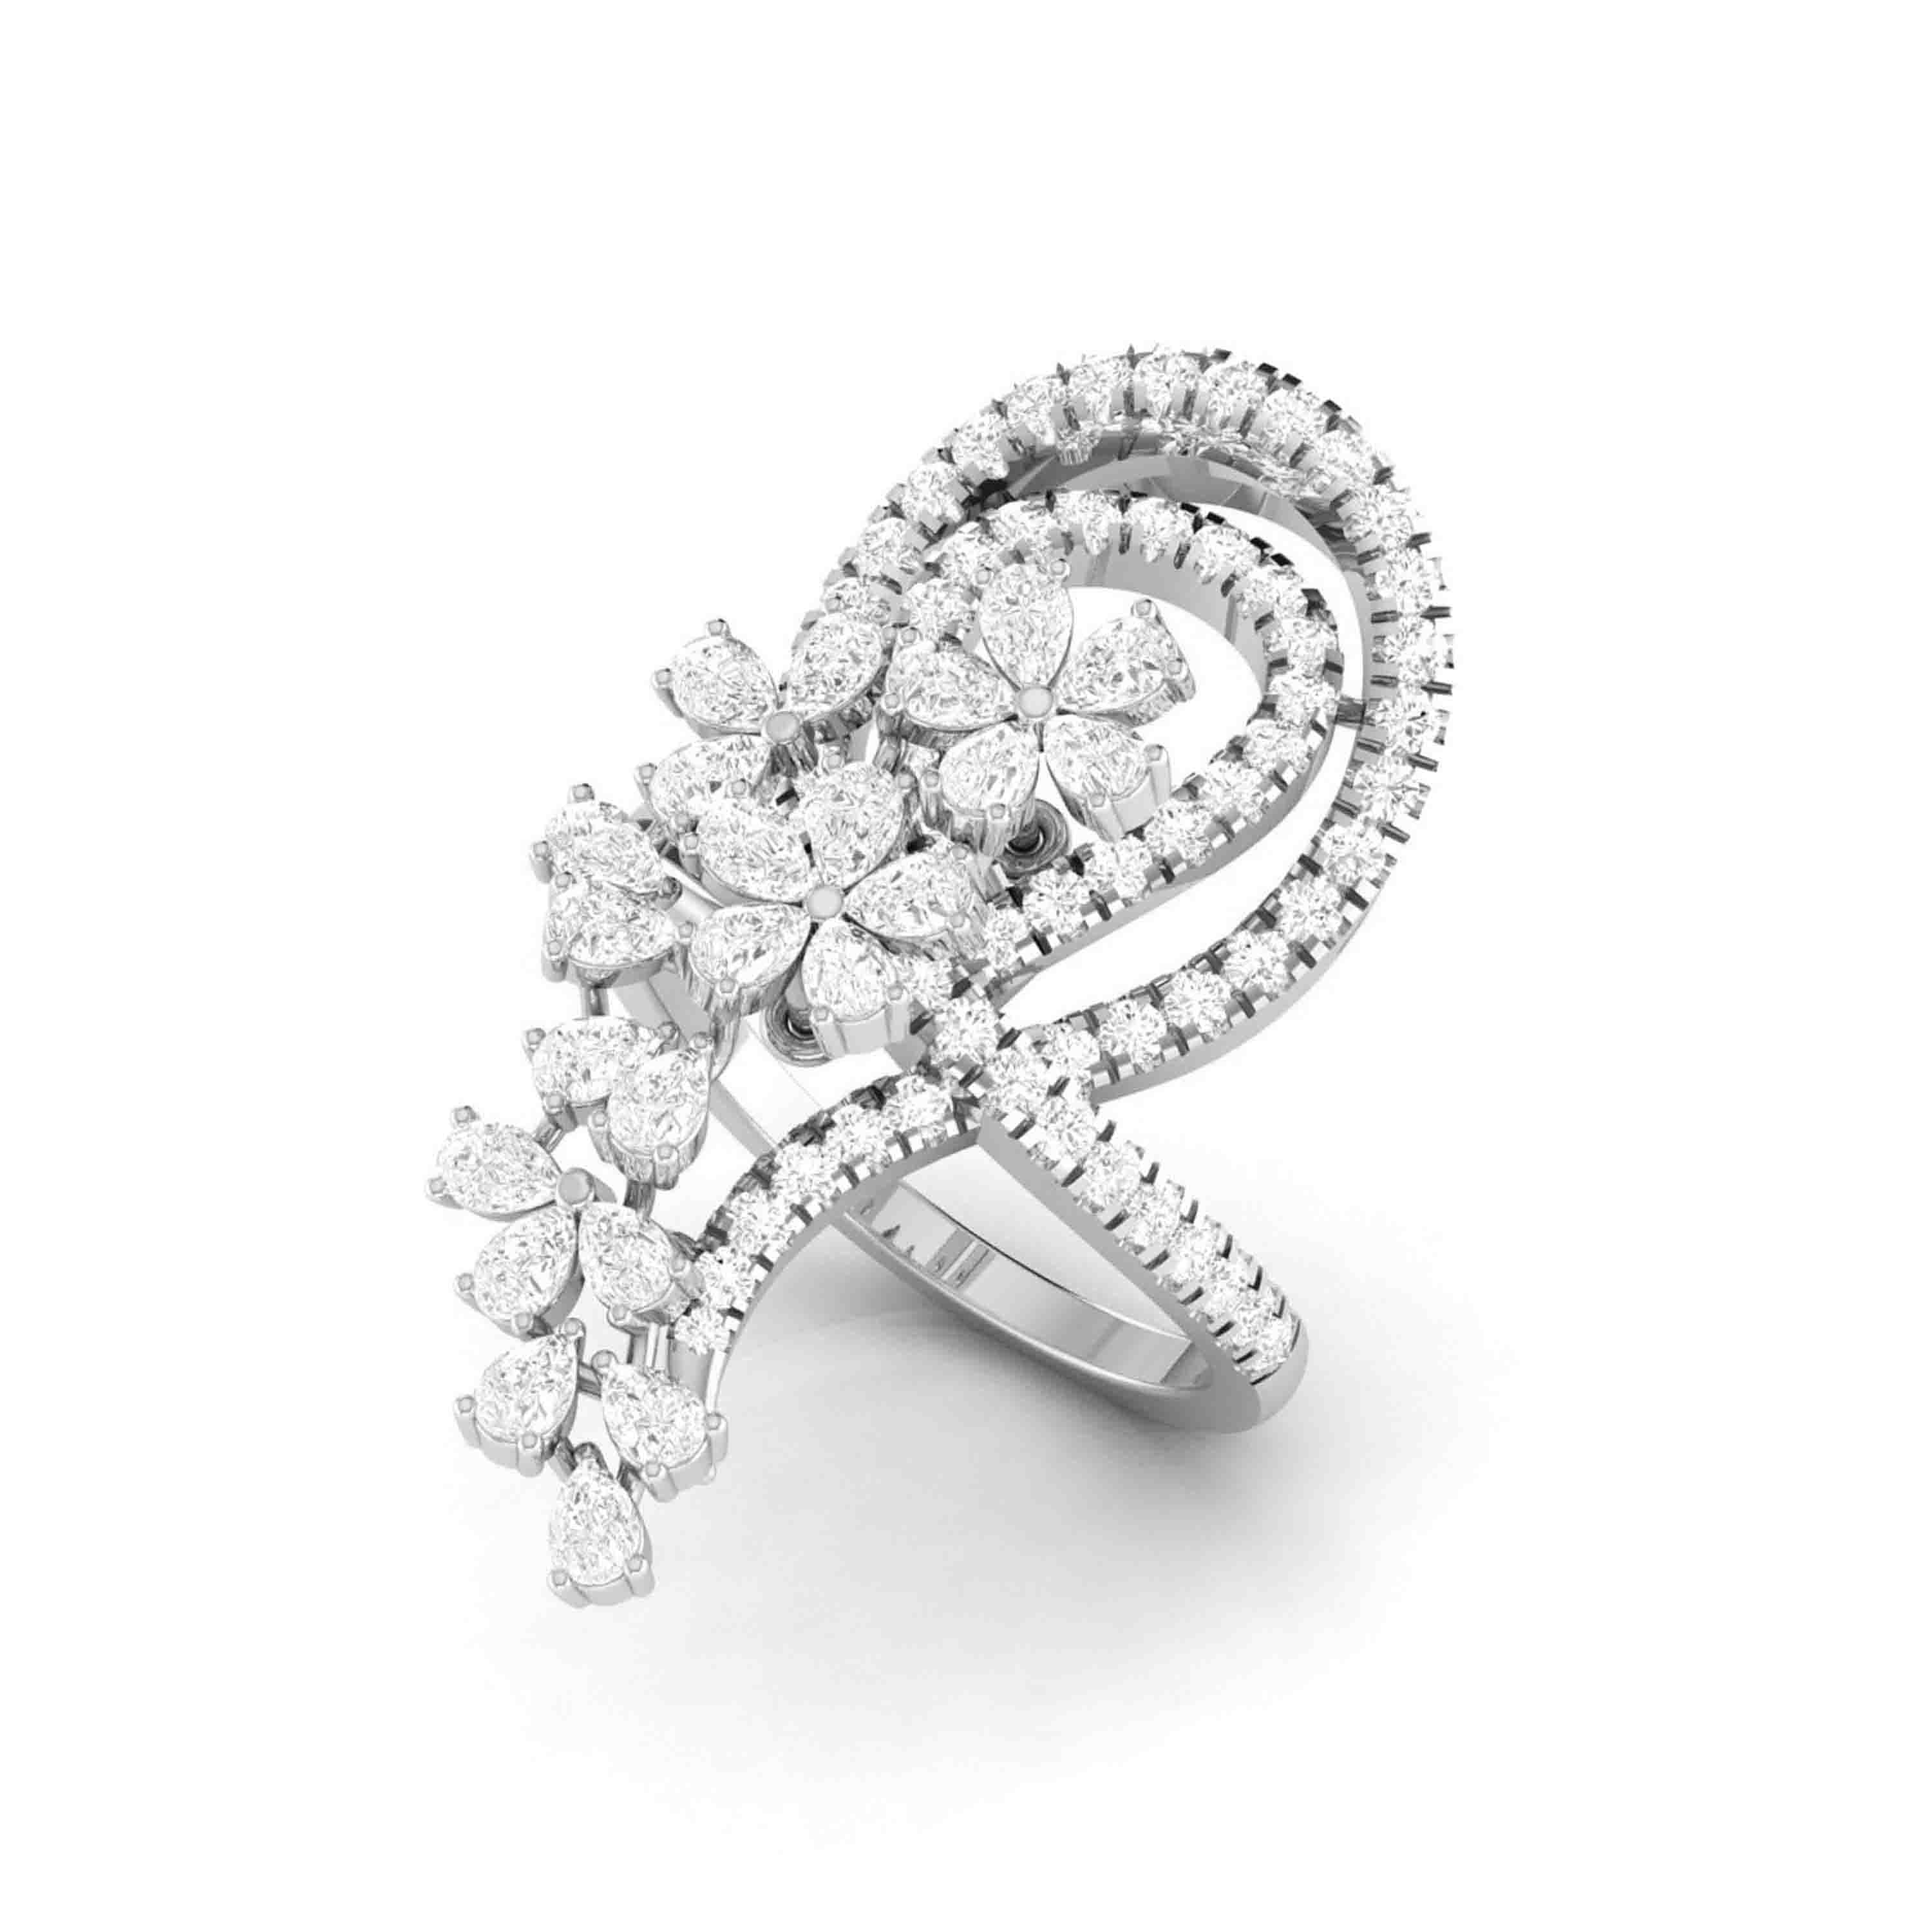 Fancy Platinum and Diamond Cocktail Ring